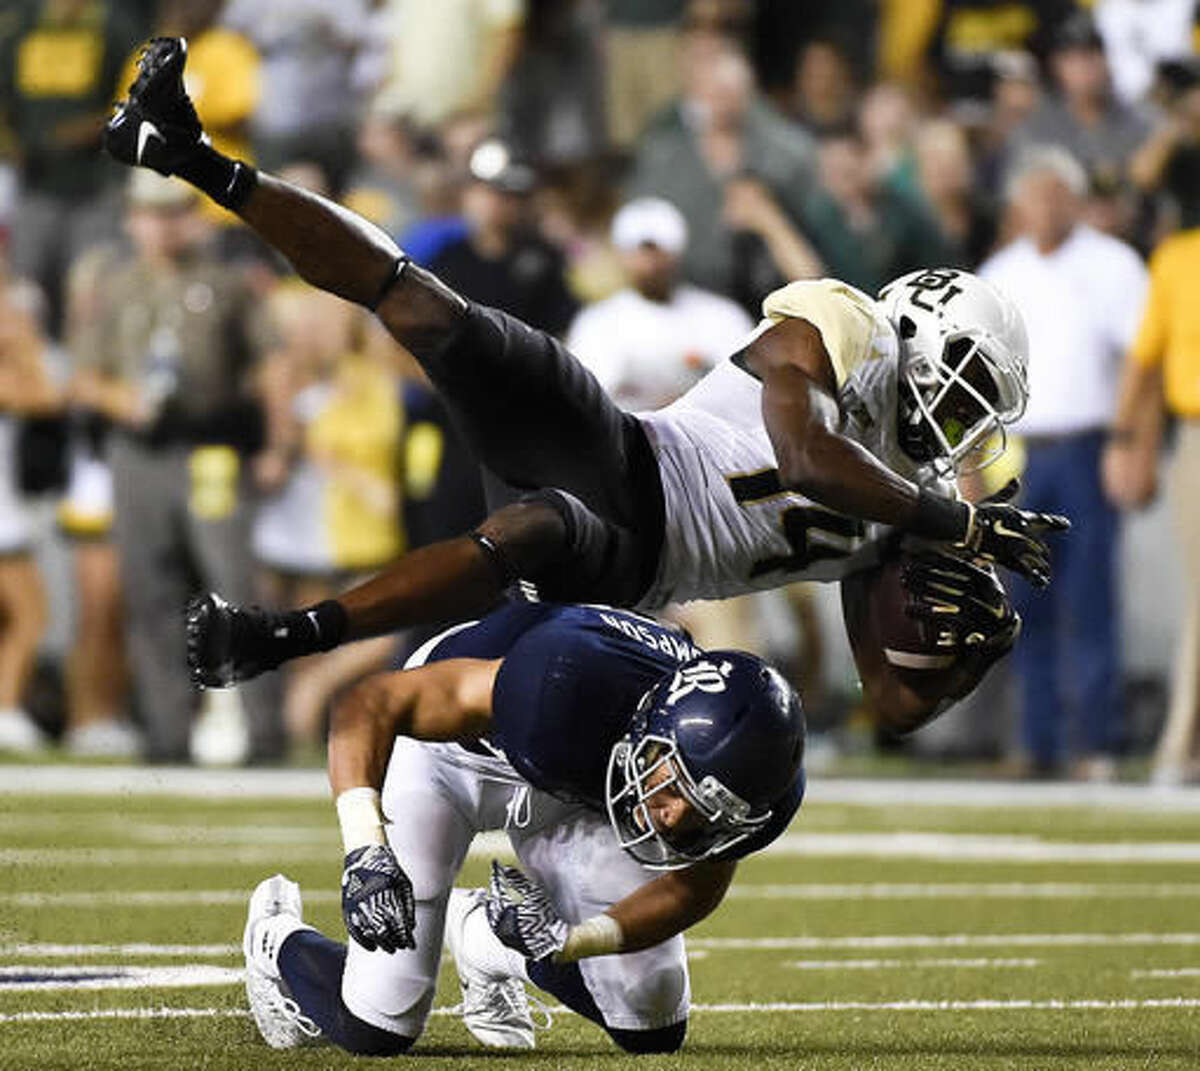 Baylor wide receiver Chris Platt, top, is hit by Rice safety J.P. Thompson in the second half of an NCAA college football game, Friday, Sept. 16, 2016, in Houston. (AP Photo/Eric Christian Smith)